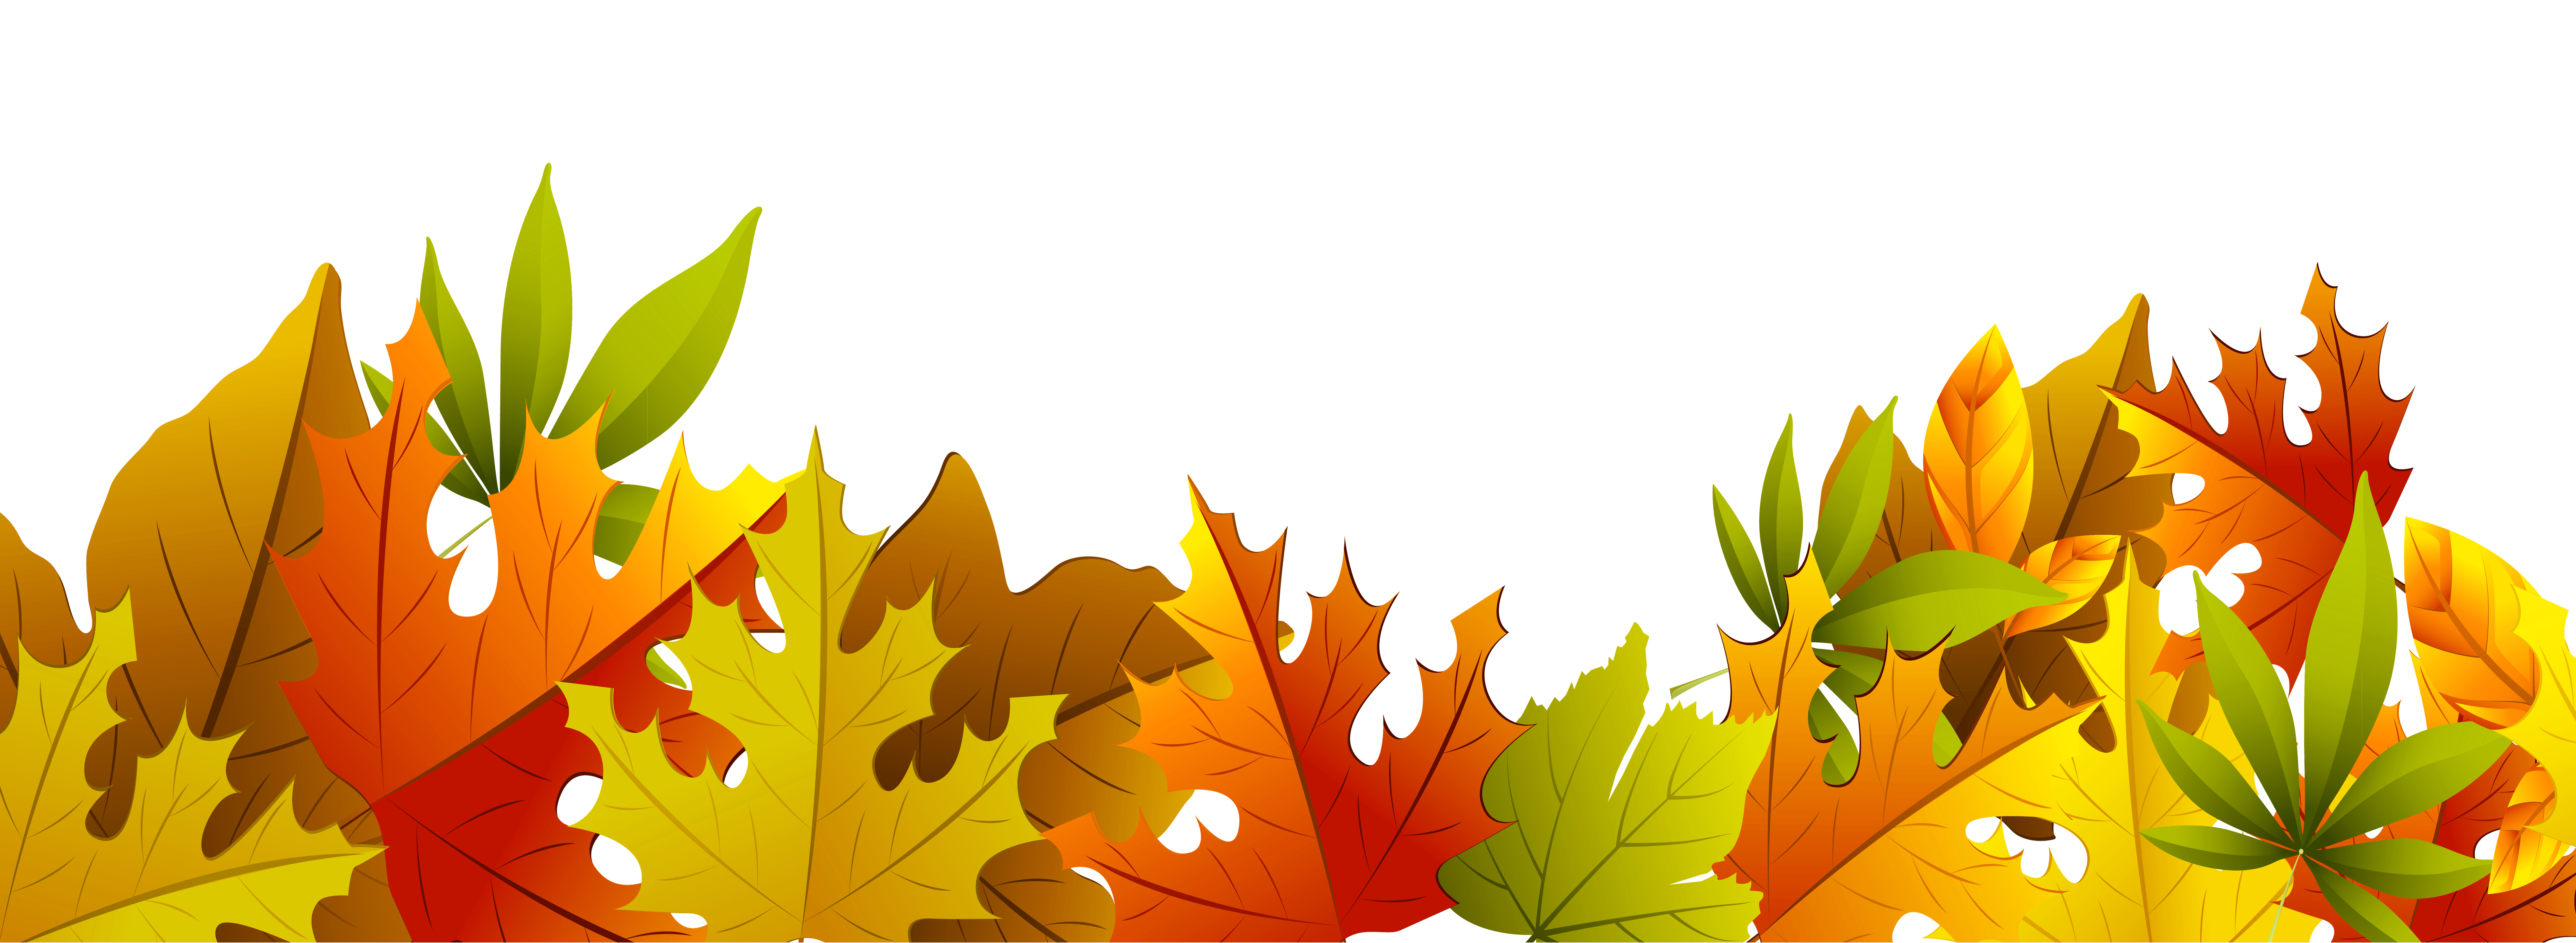 Falling leaves clipart free clipartfest